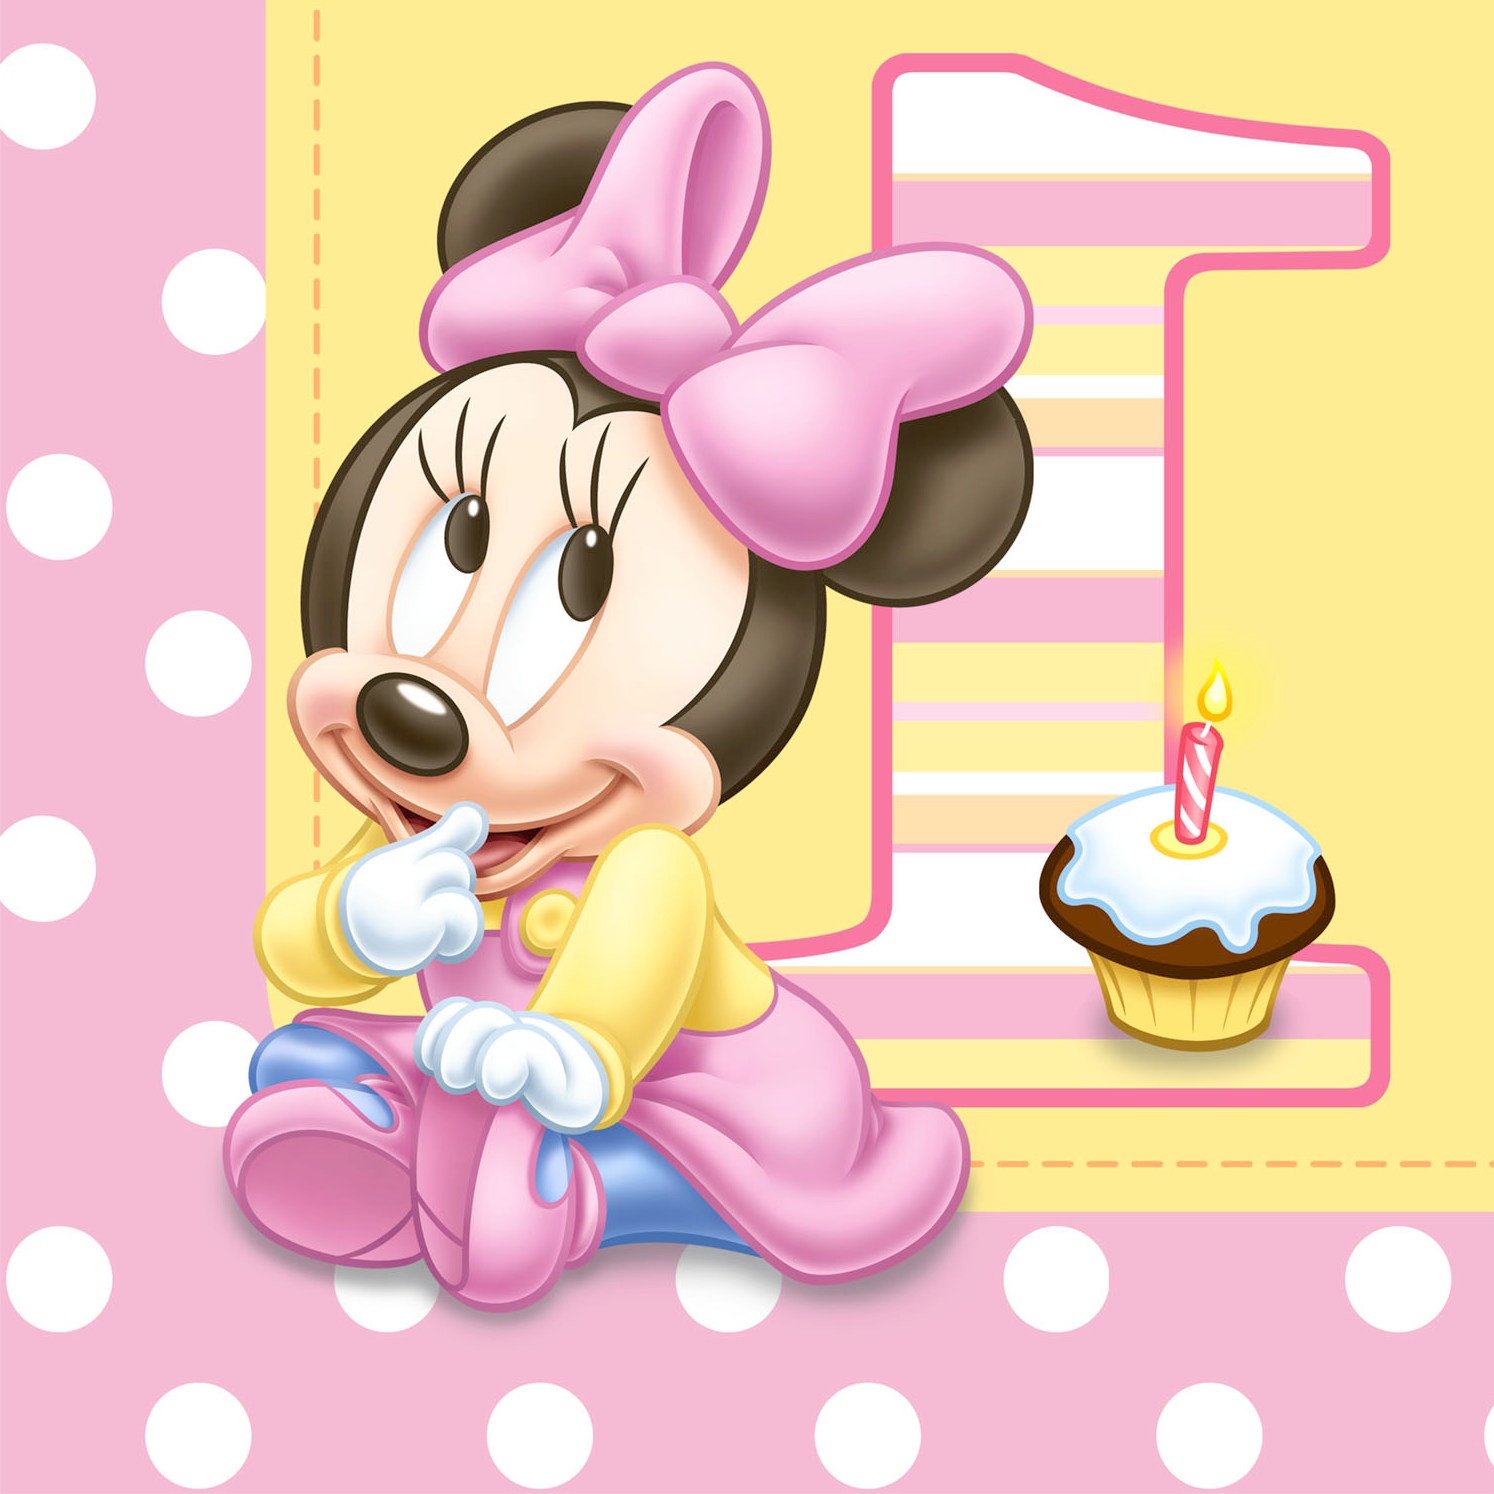 Wallpaper Military Wallpaper Hd Hd Wallpaper Of Home - Baby Minnie Mouse Background , HD Wallpaper & Backgrounds